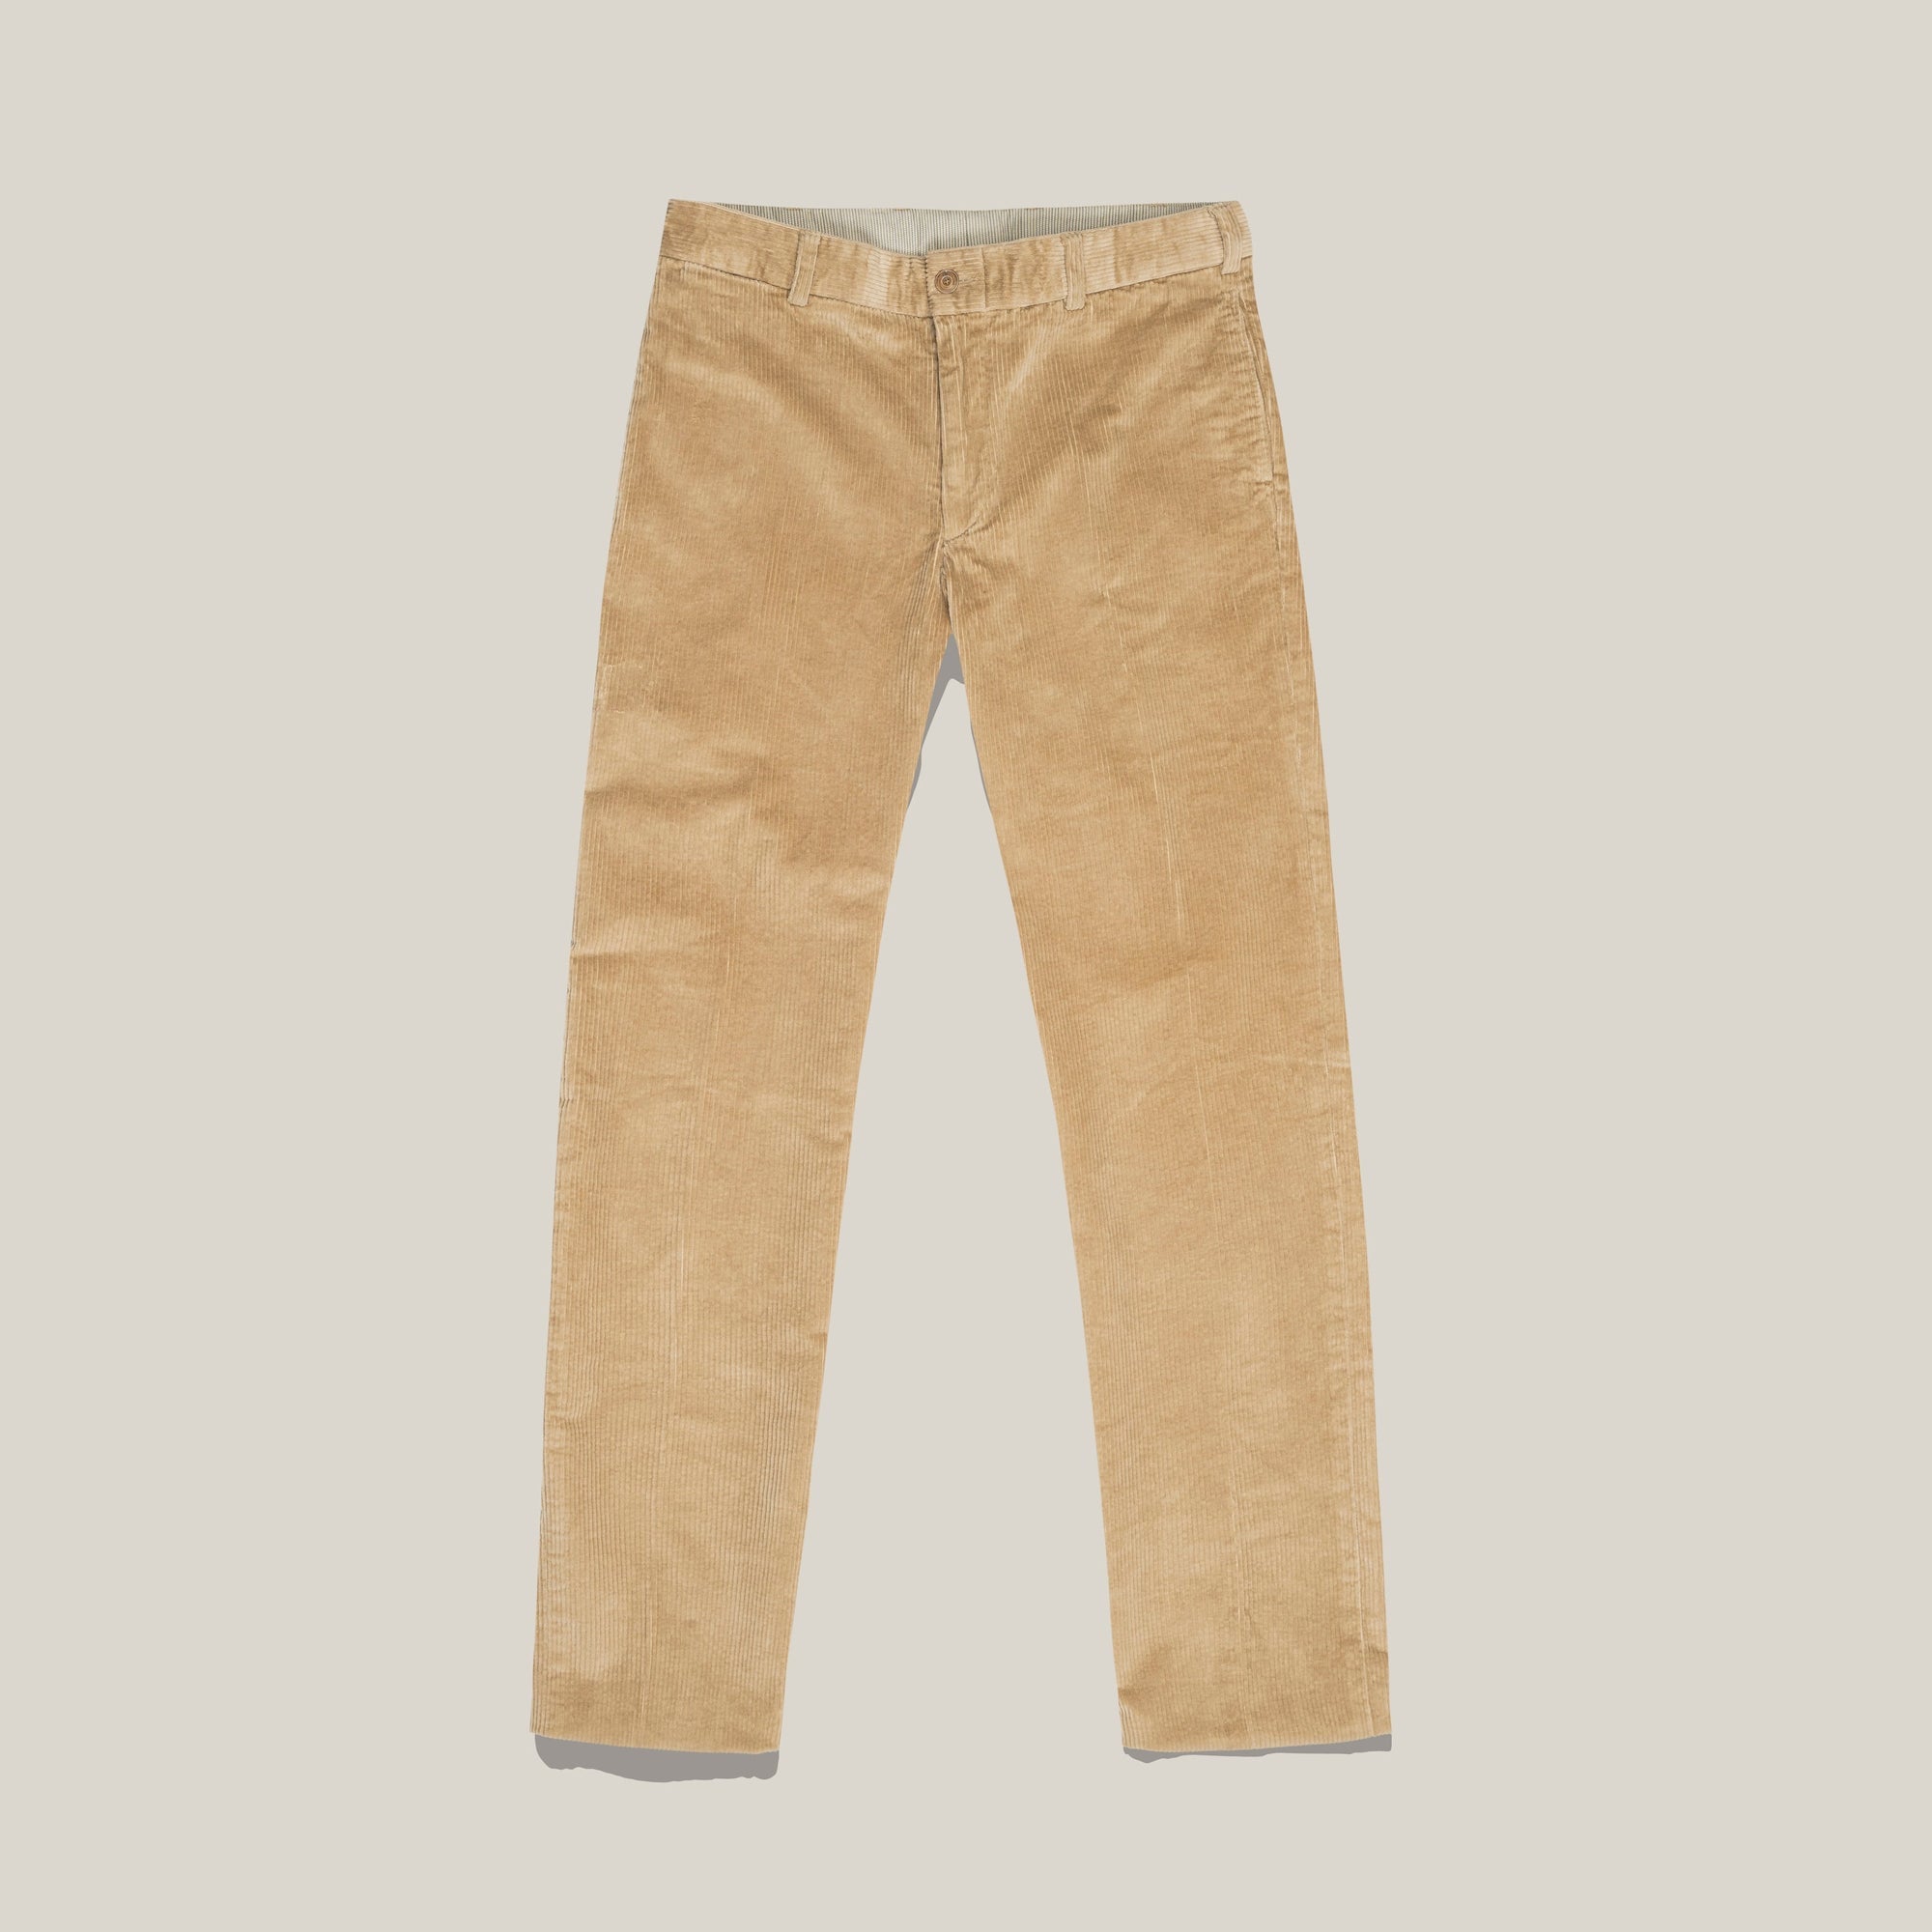 M2 Classic Fit Stretch 7 Wale Cords in Khaki by Bills Khakis